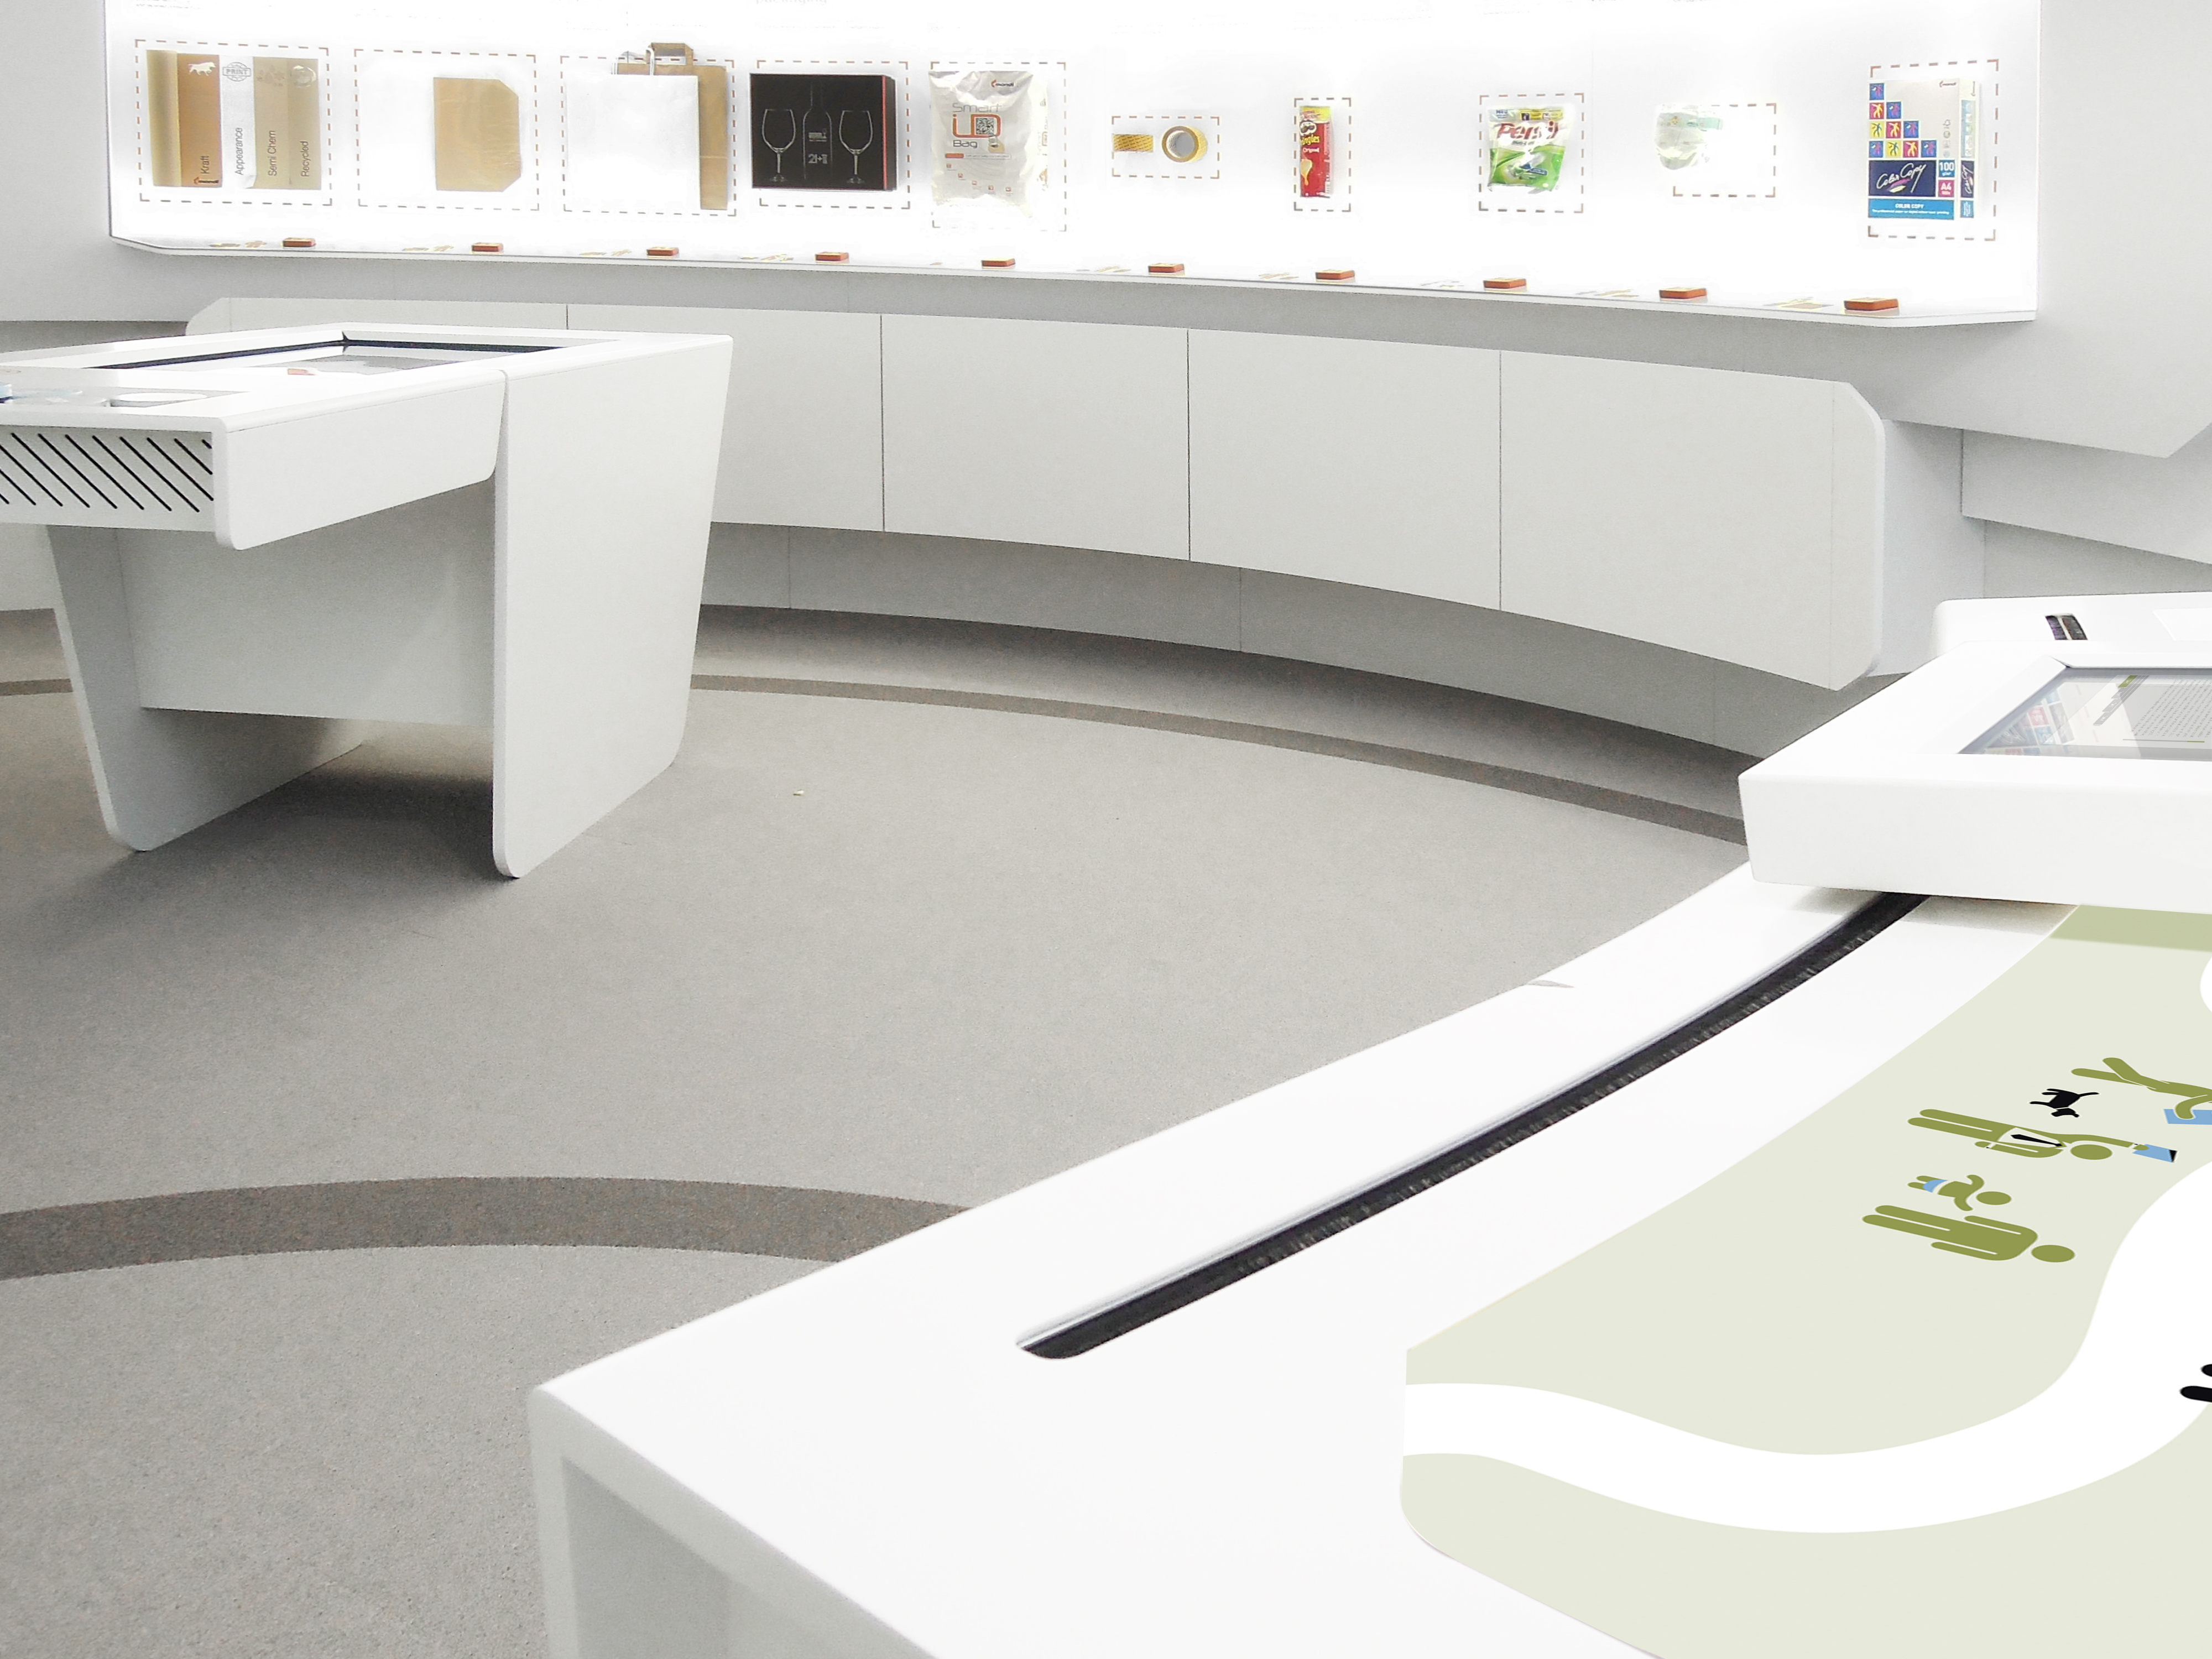 Product wall and interactive table with movable screen element